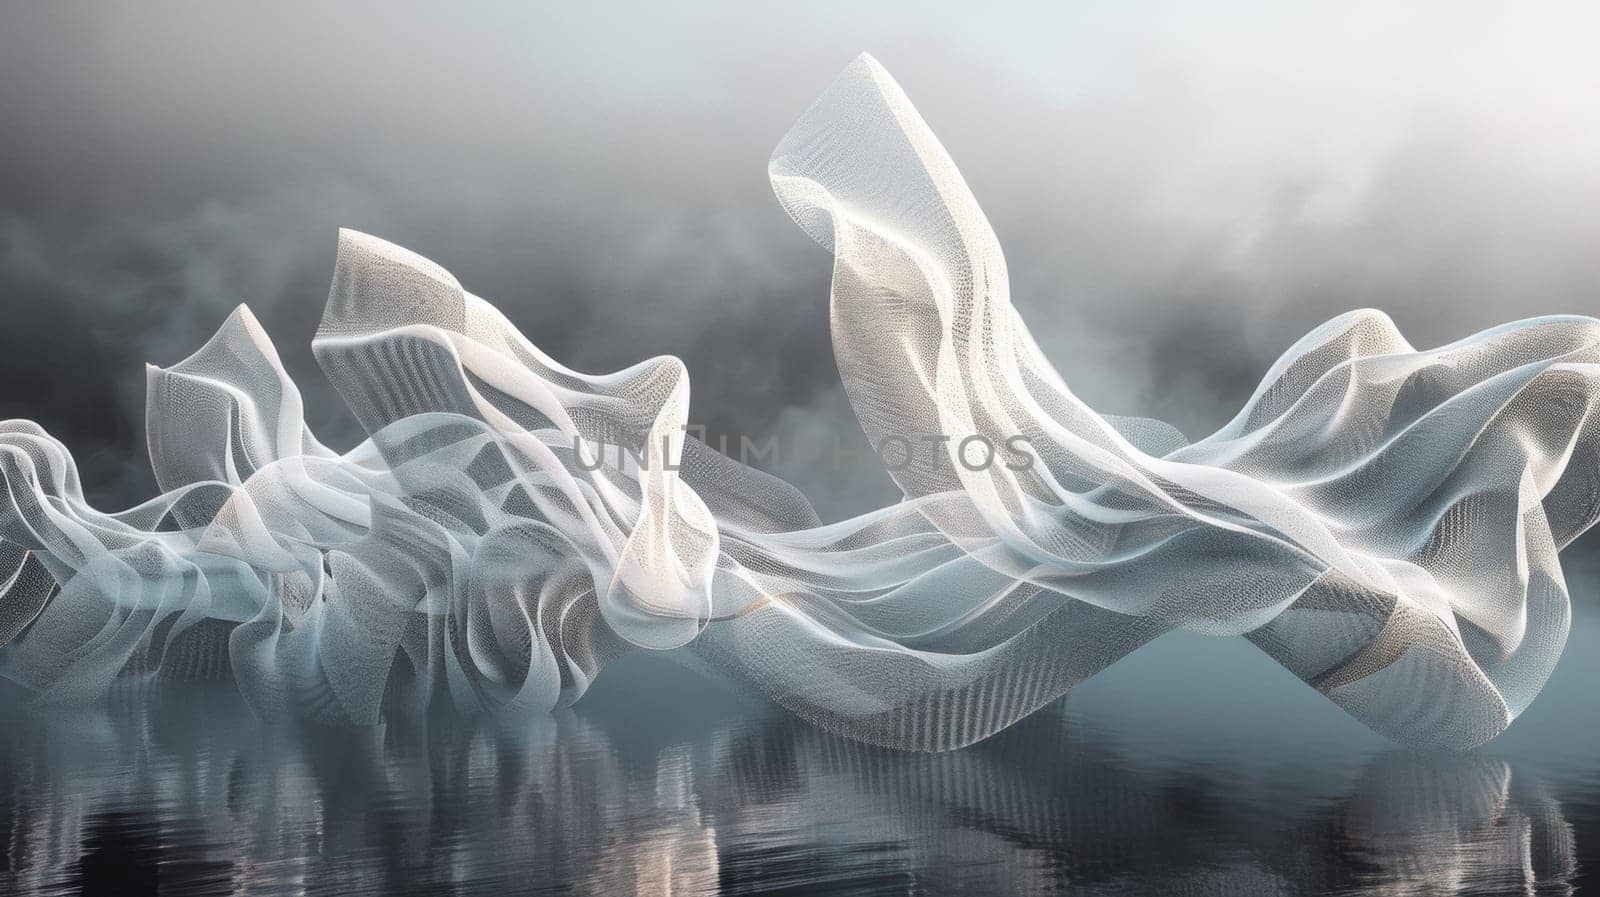 A digital art of a wave pattern in the water